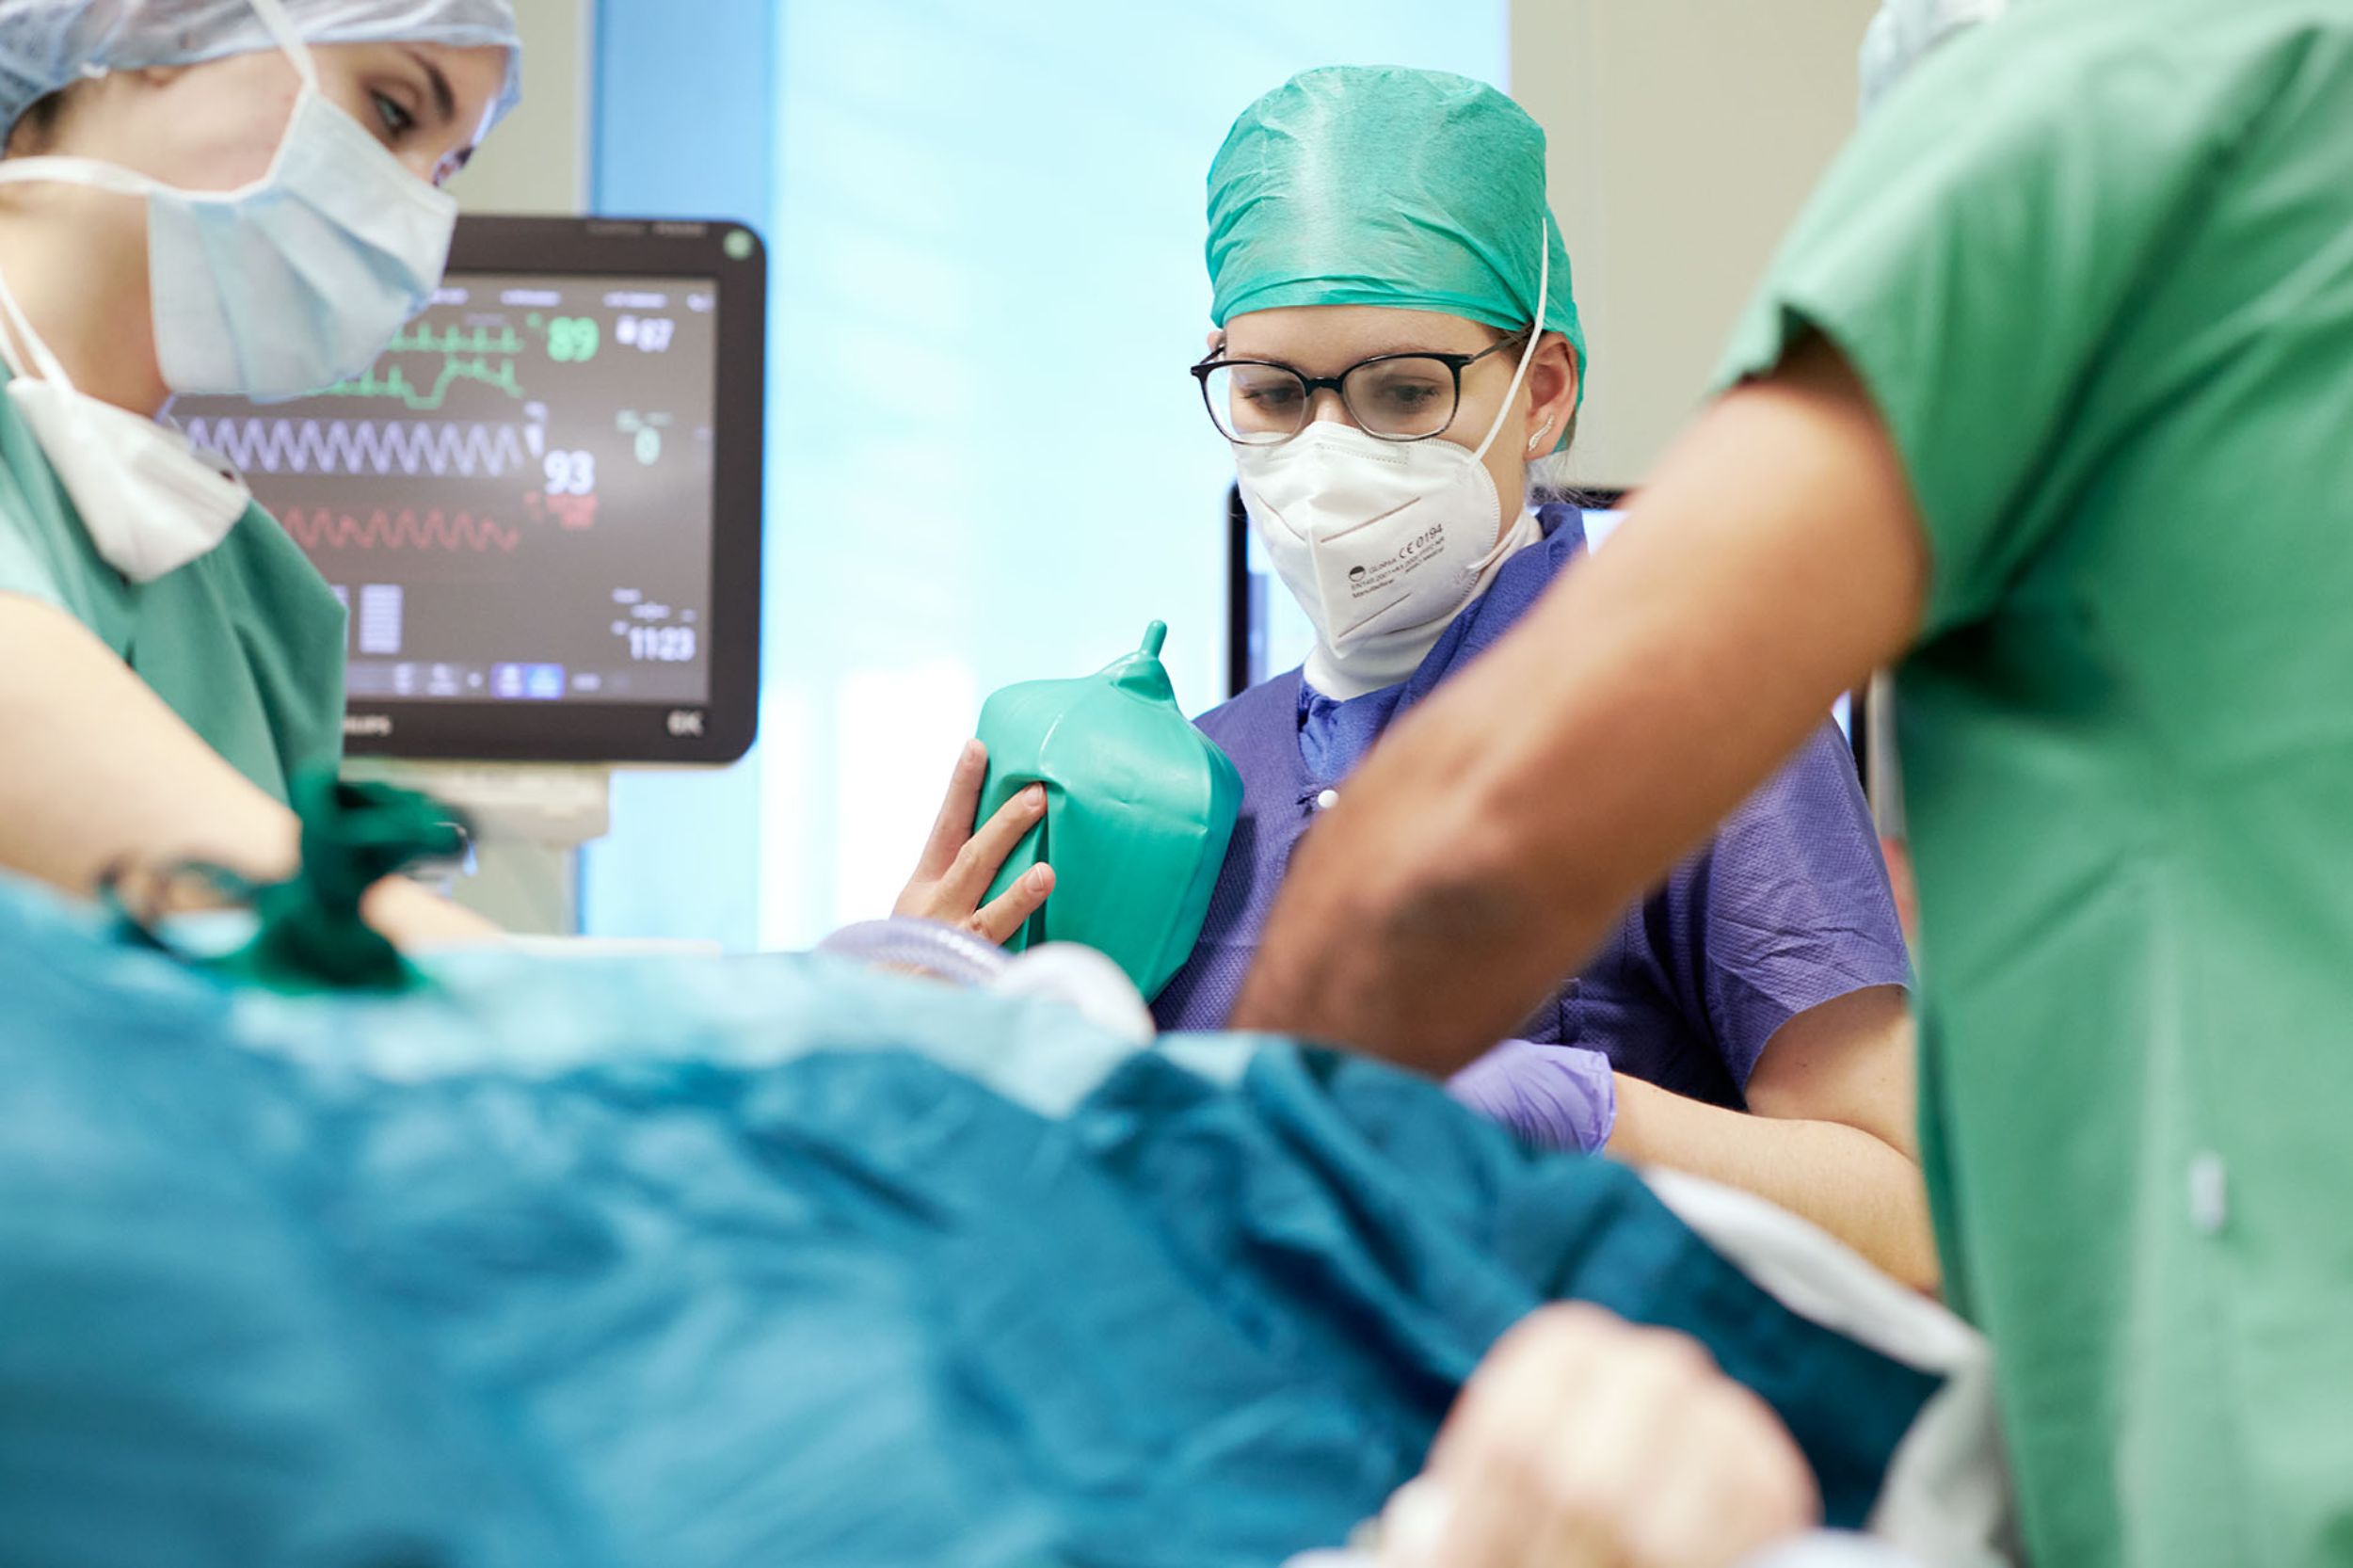 Anesthesiologist with surgical team preparing the patient for surgery